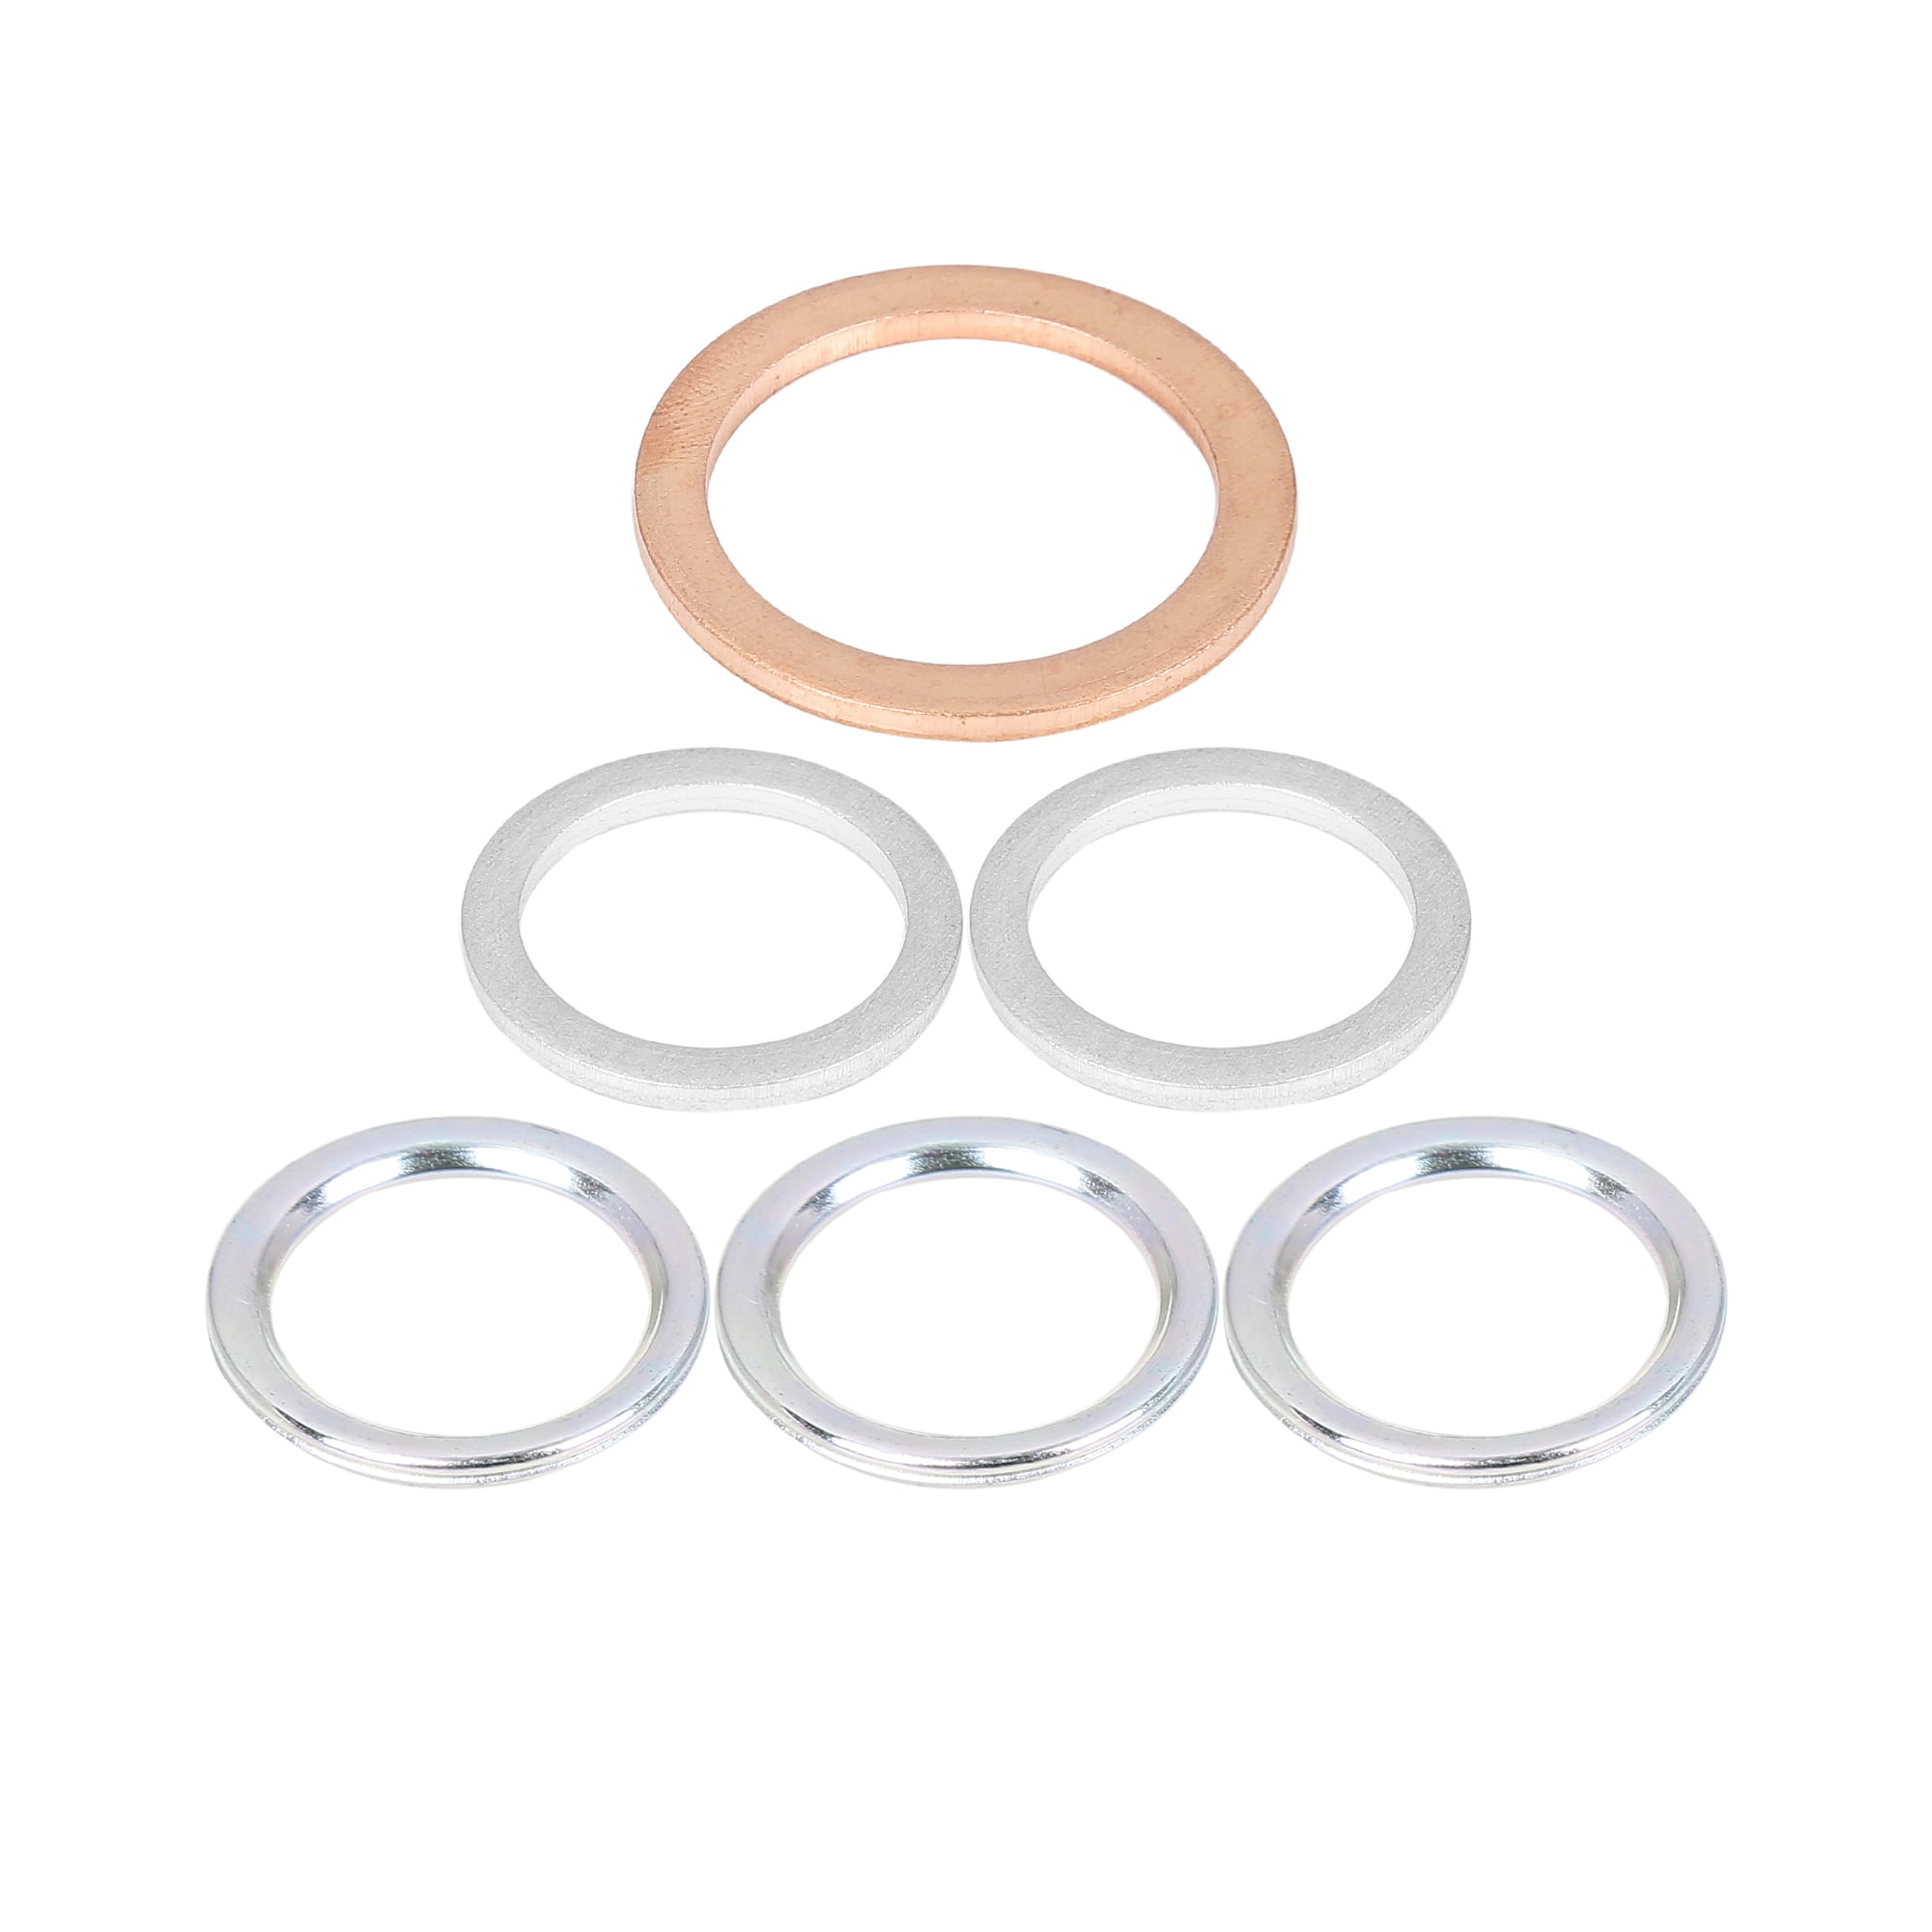 XtremeAmazing Set of 12 Transmission and Differential Fill Drain Plug Gaskets Crush Washer Seal Replace 90430-18008 12157-10010 90430-24003 